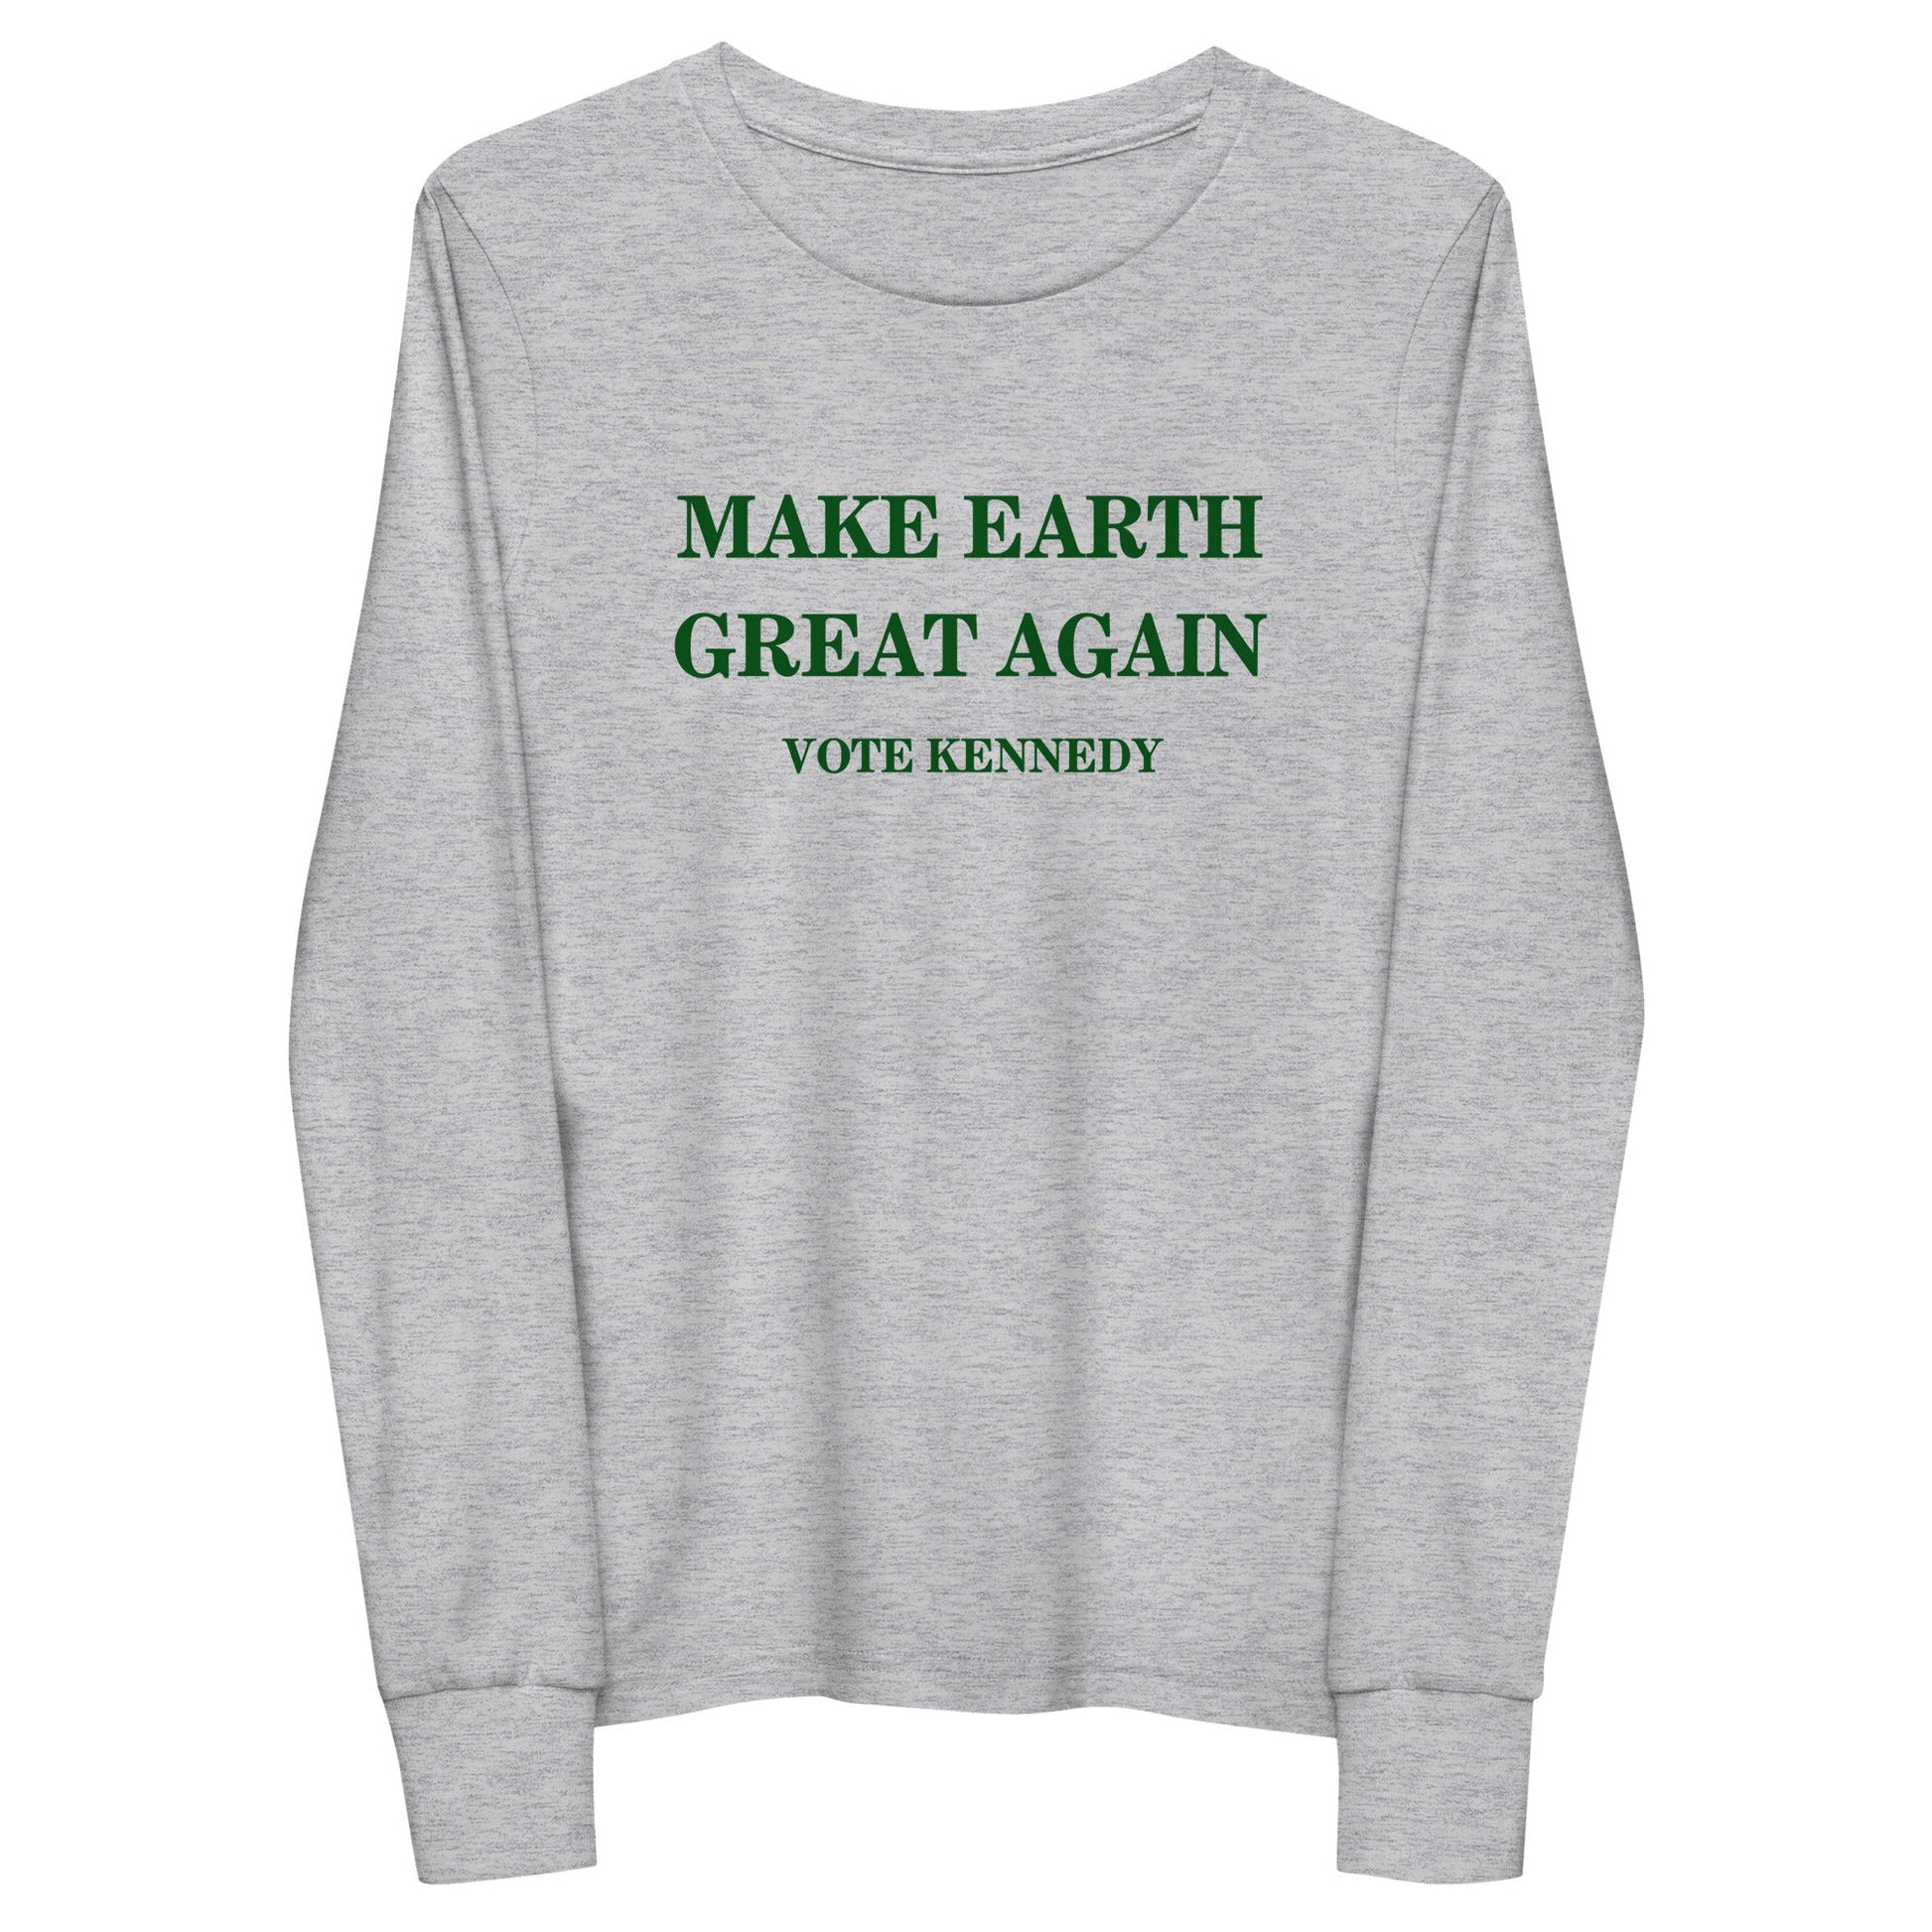 Make Earth Great Again Youth Long Sleeve Tee - TEAM KENNEDY. All rights reserved